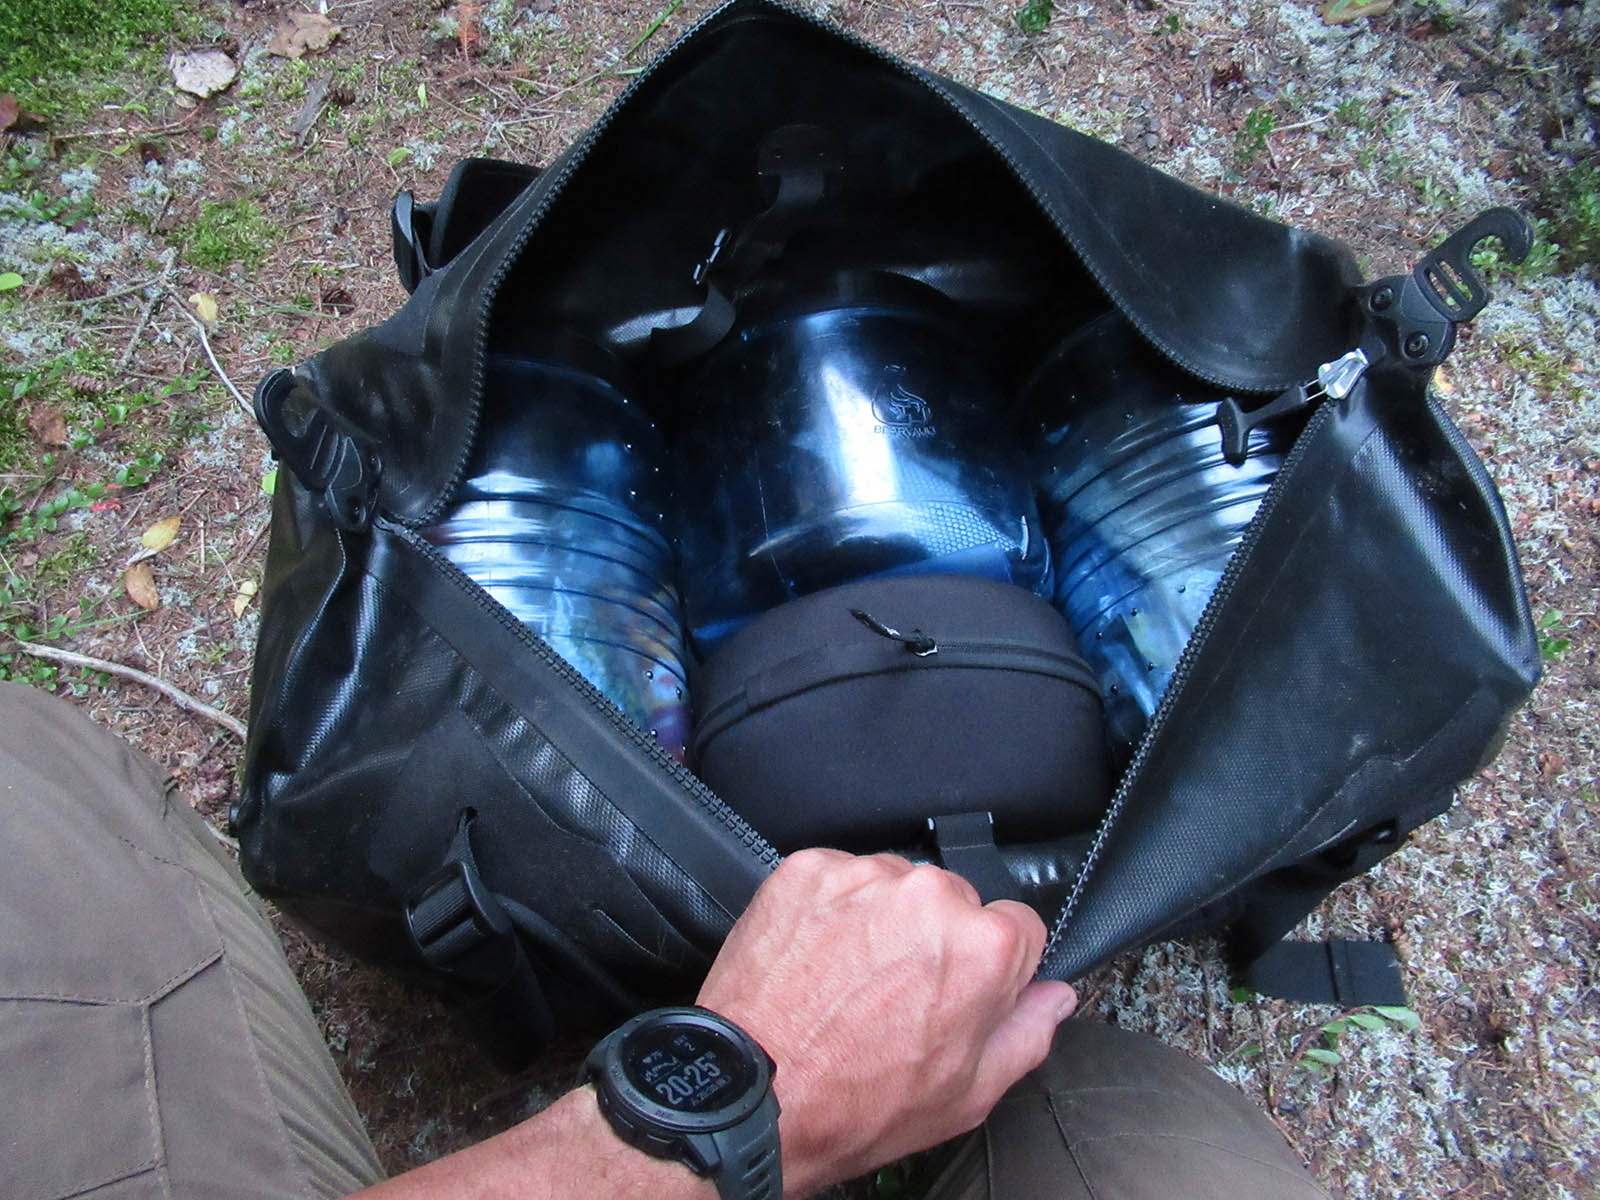 Trangia Cookset With Packed Gear